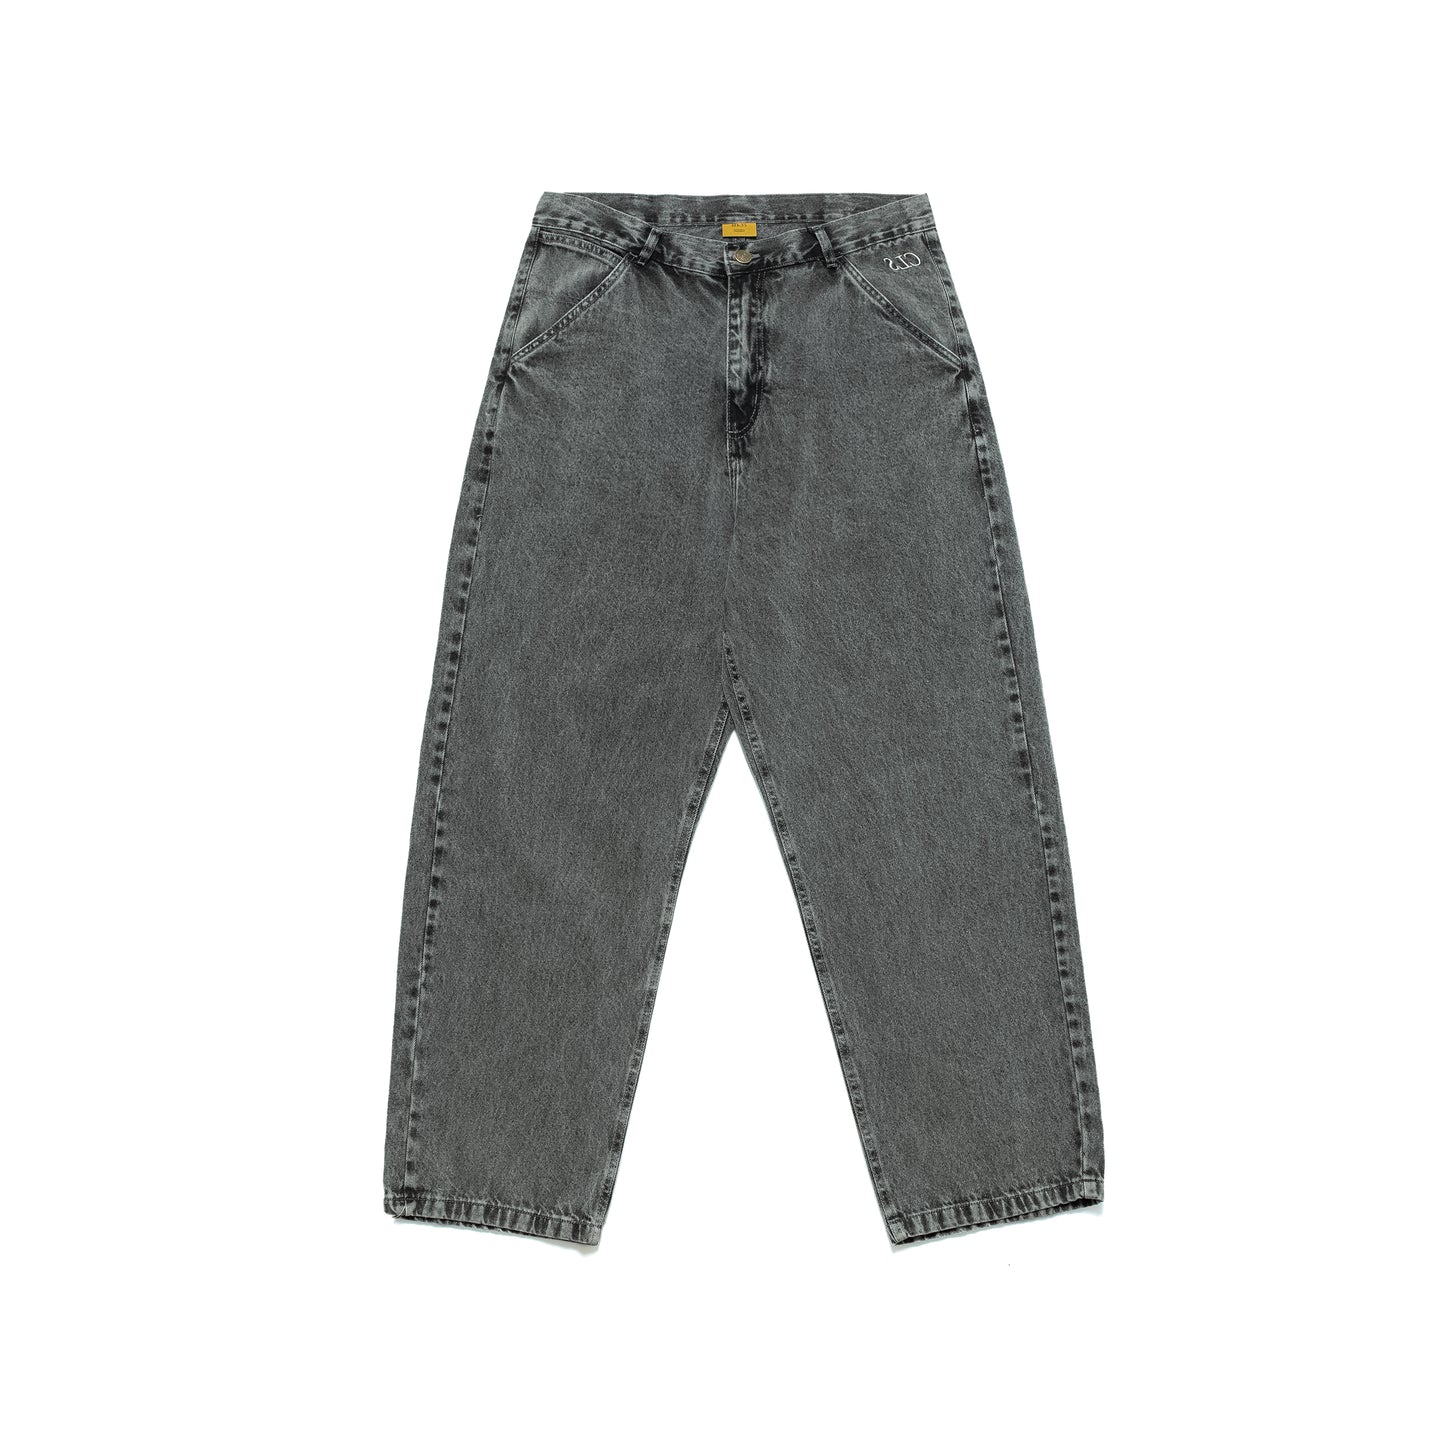 Jeans Pants "Brutalism" Gray Marble